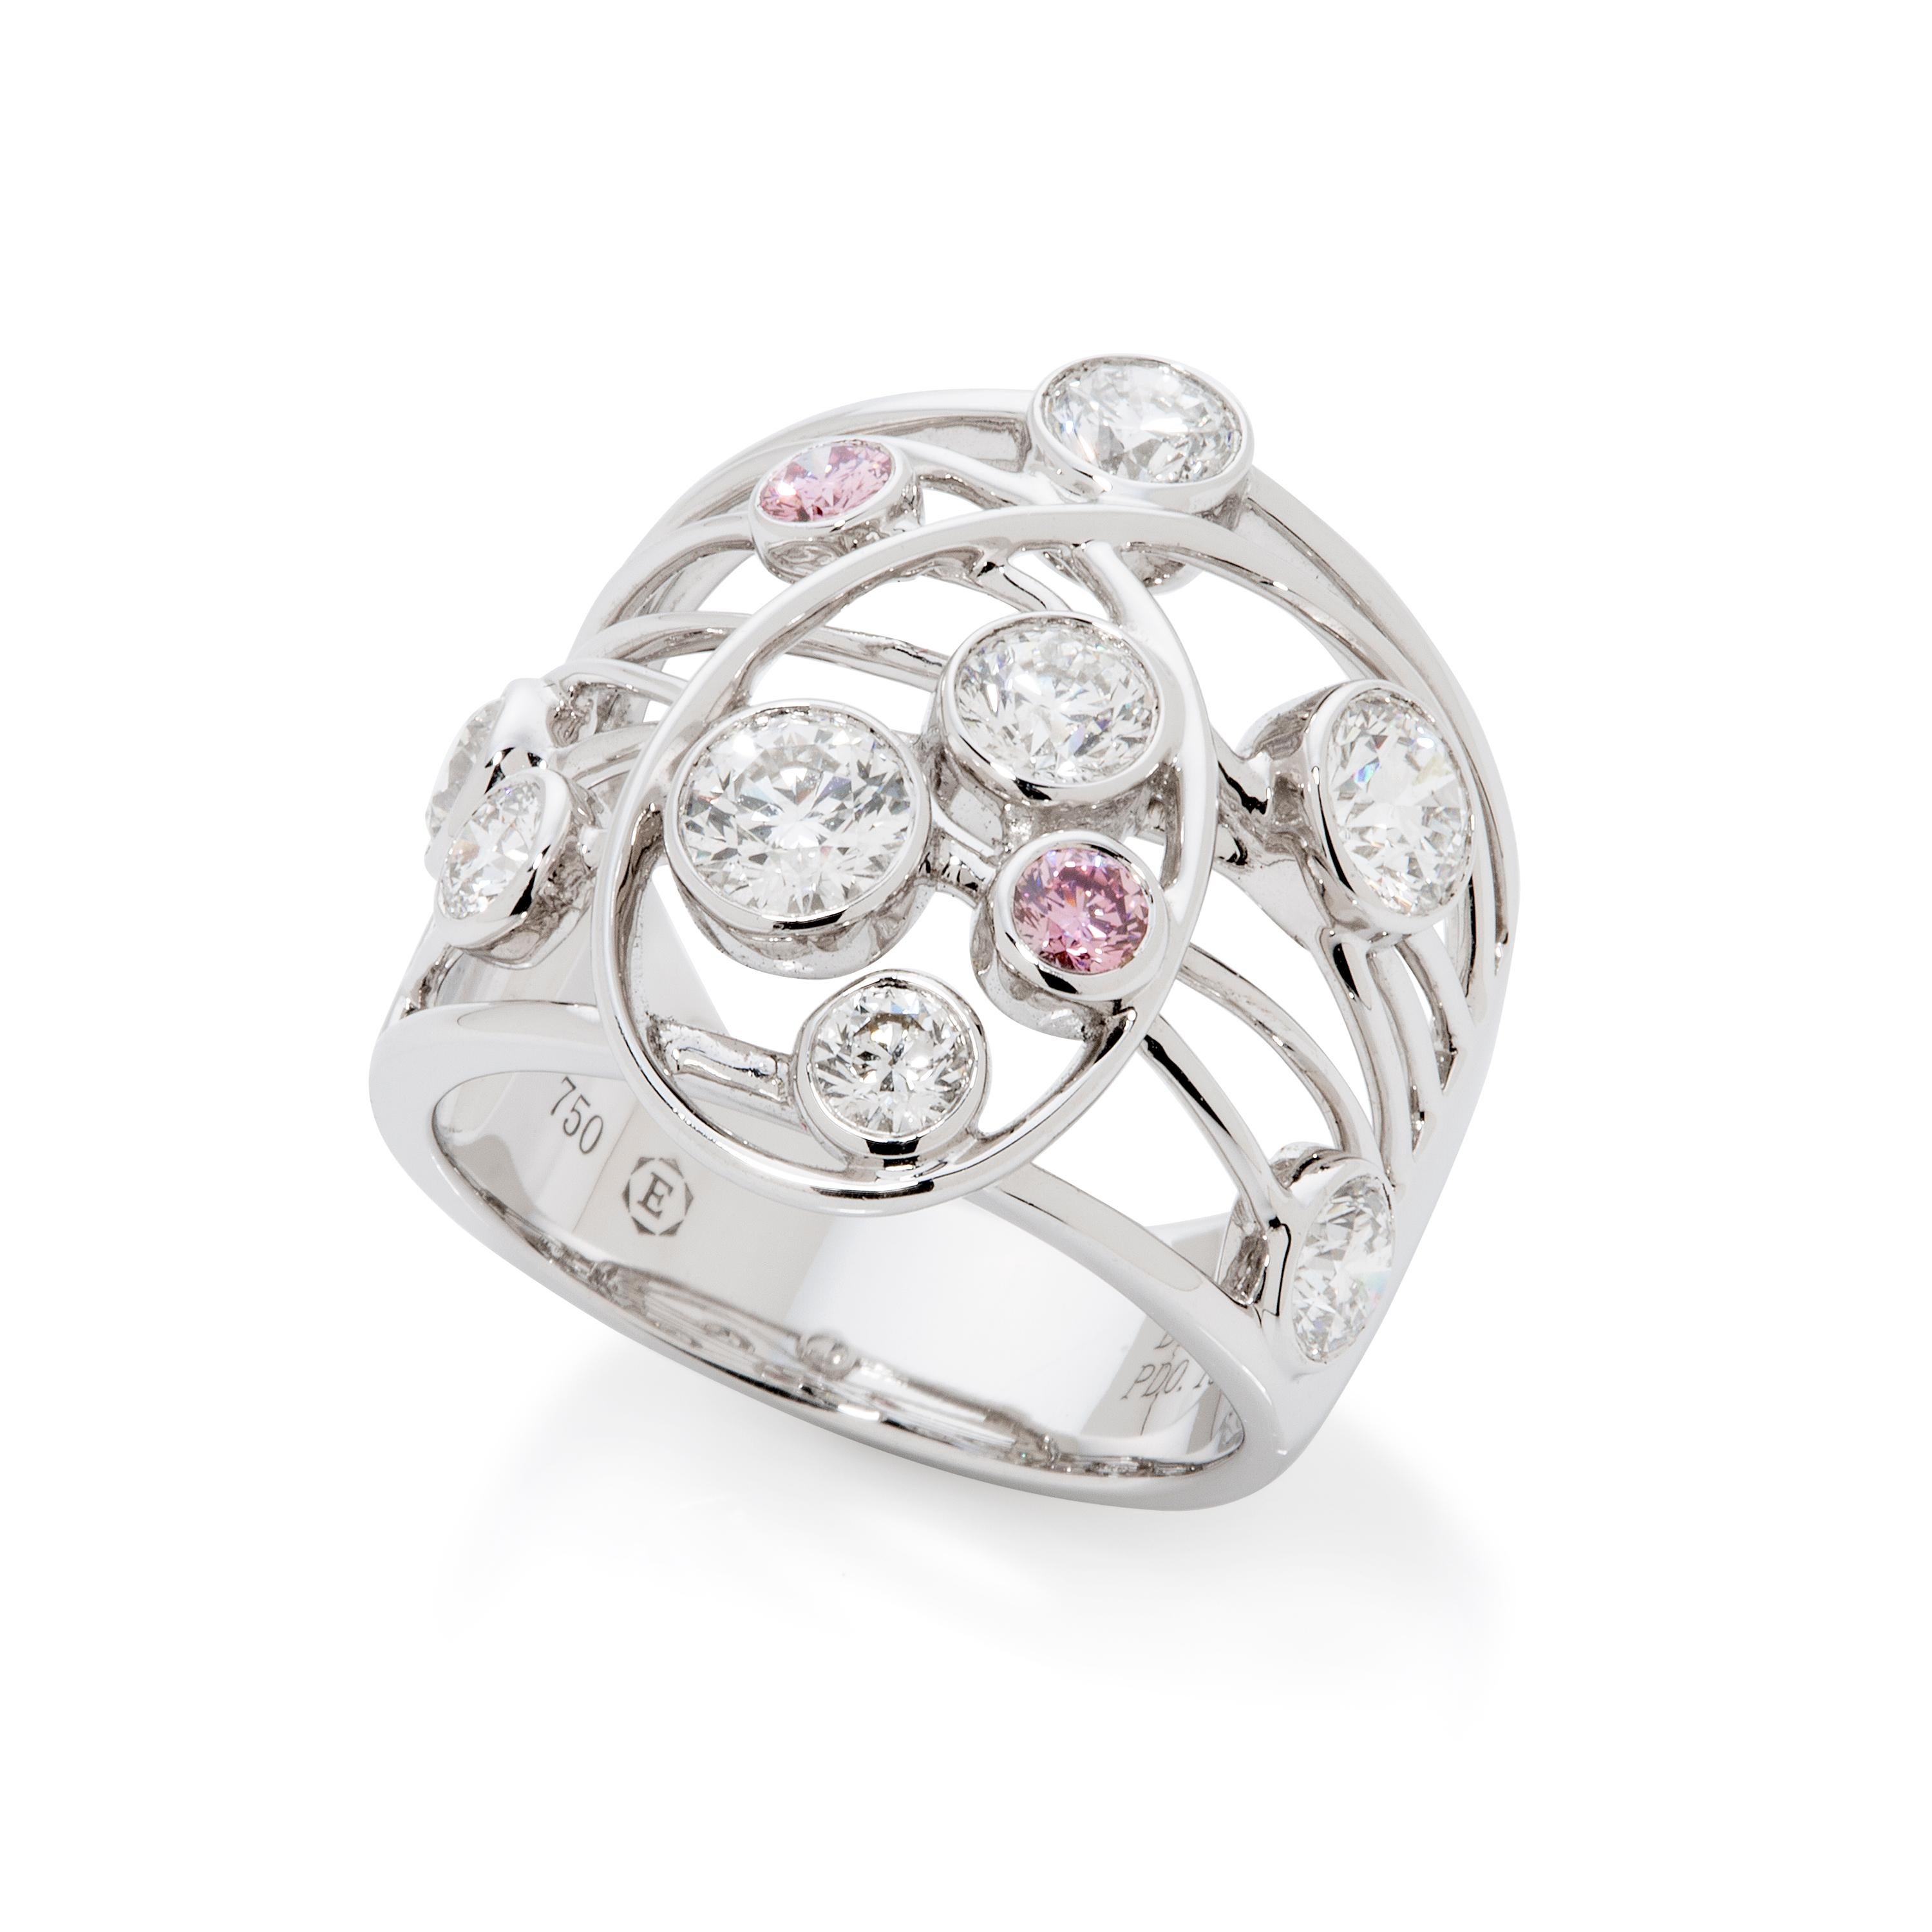 A 18K white gold statement dress ring featuring two round brilliant cut pink diamonds totalling 0.16 carats and eight round brilliant cut diamonds totalling 1.69 carats. The ring size is L and the total weight is 10.68 grams.

We are proud to